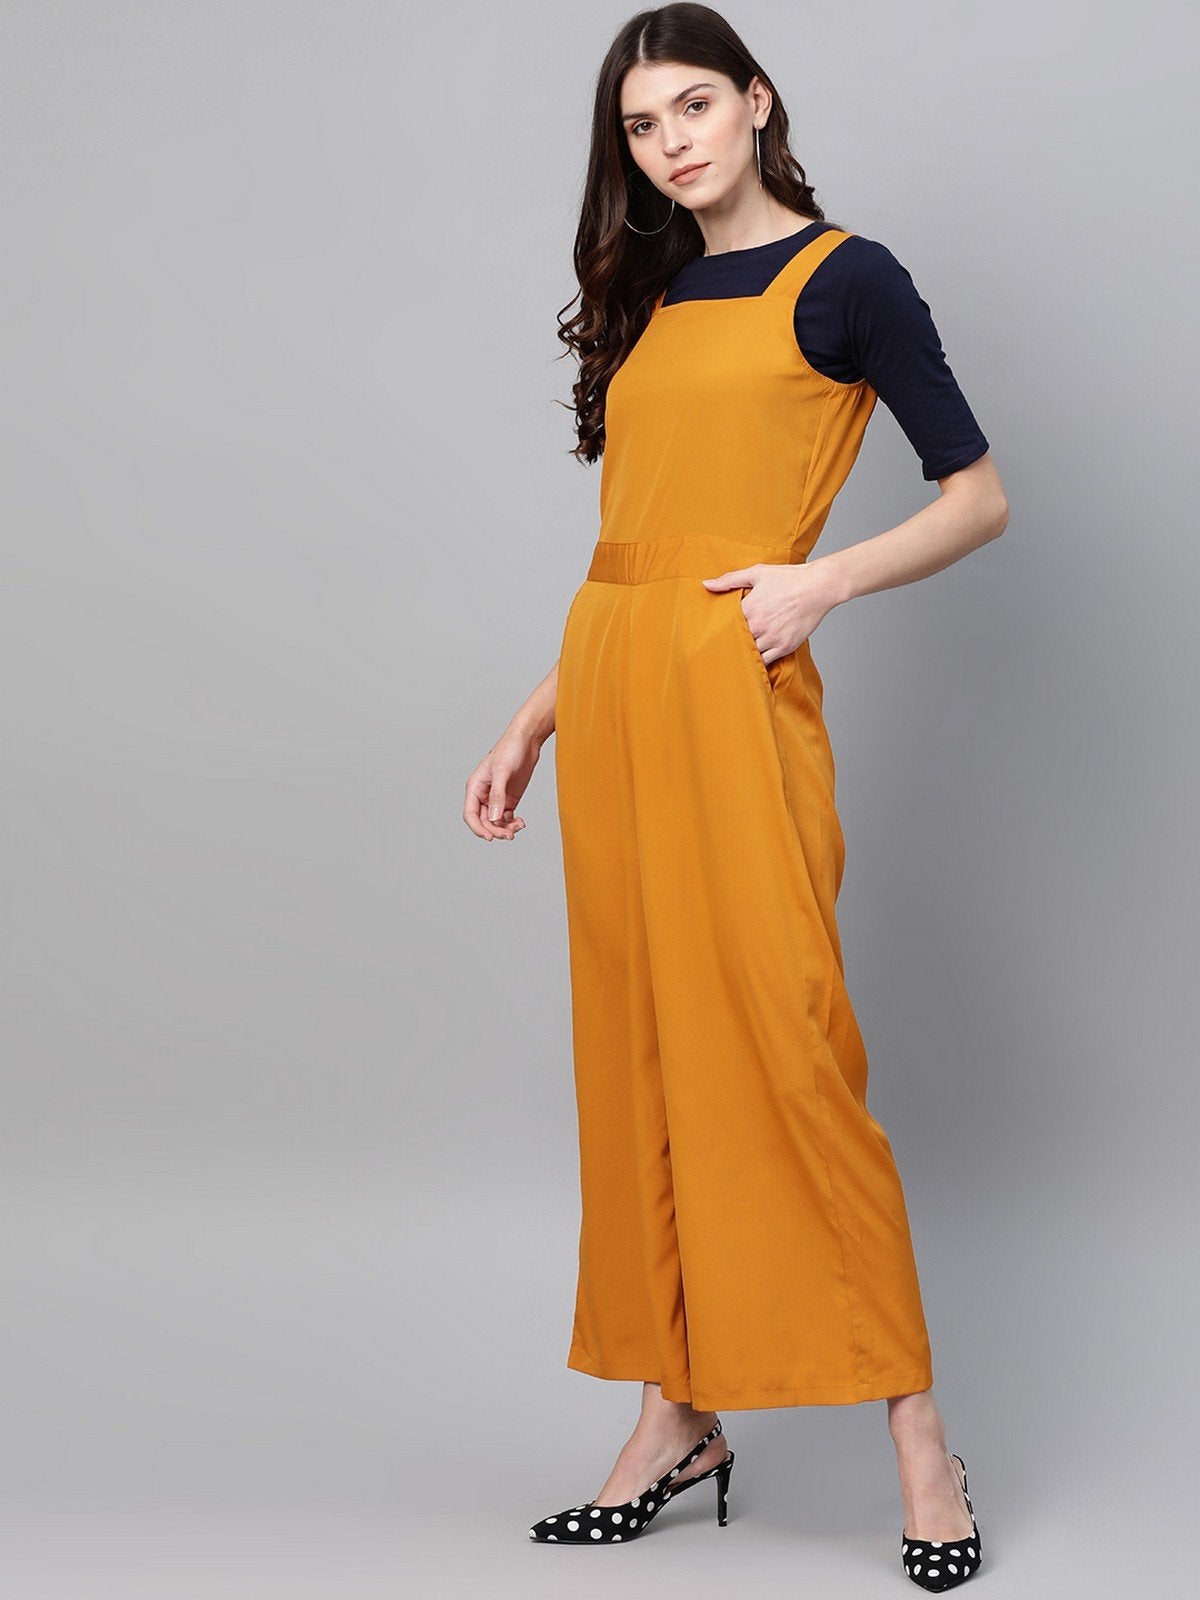 Women's Solid Jumpsuit With Contrast Top - Pannkh